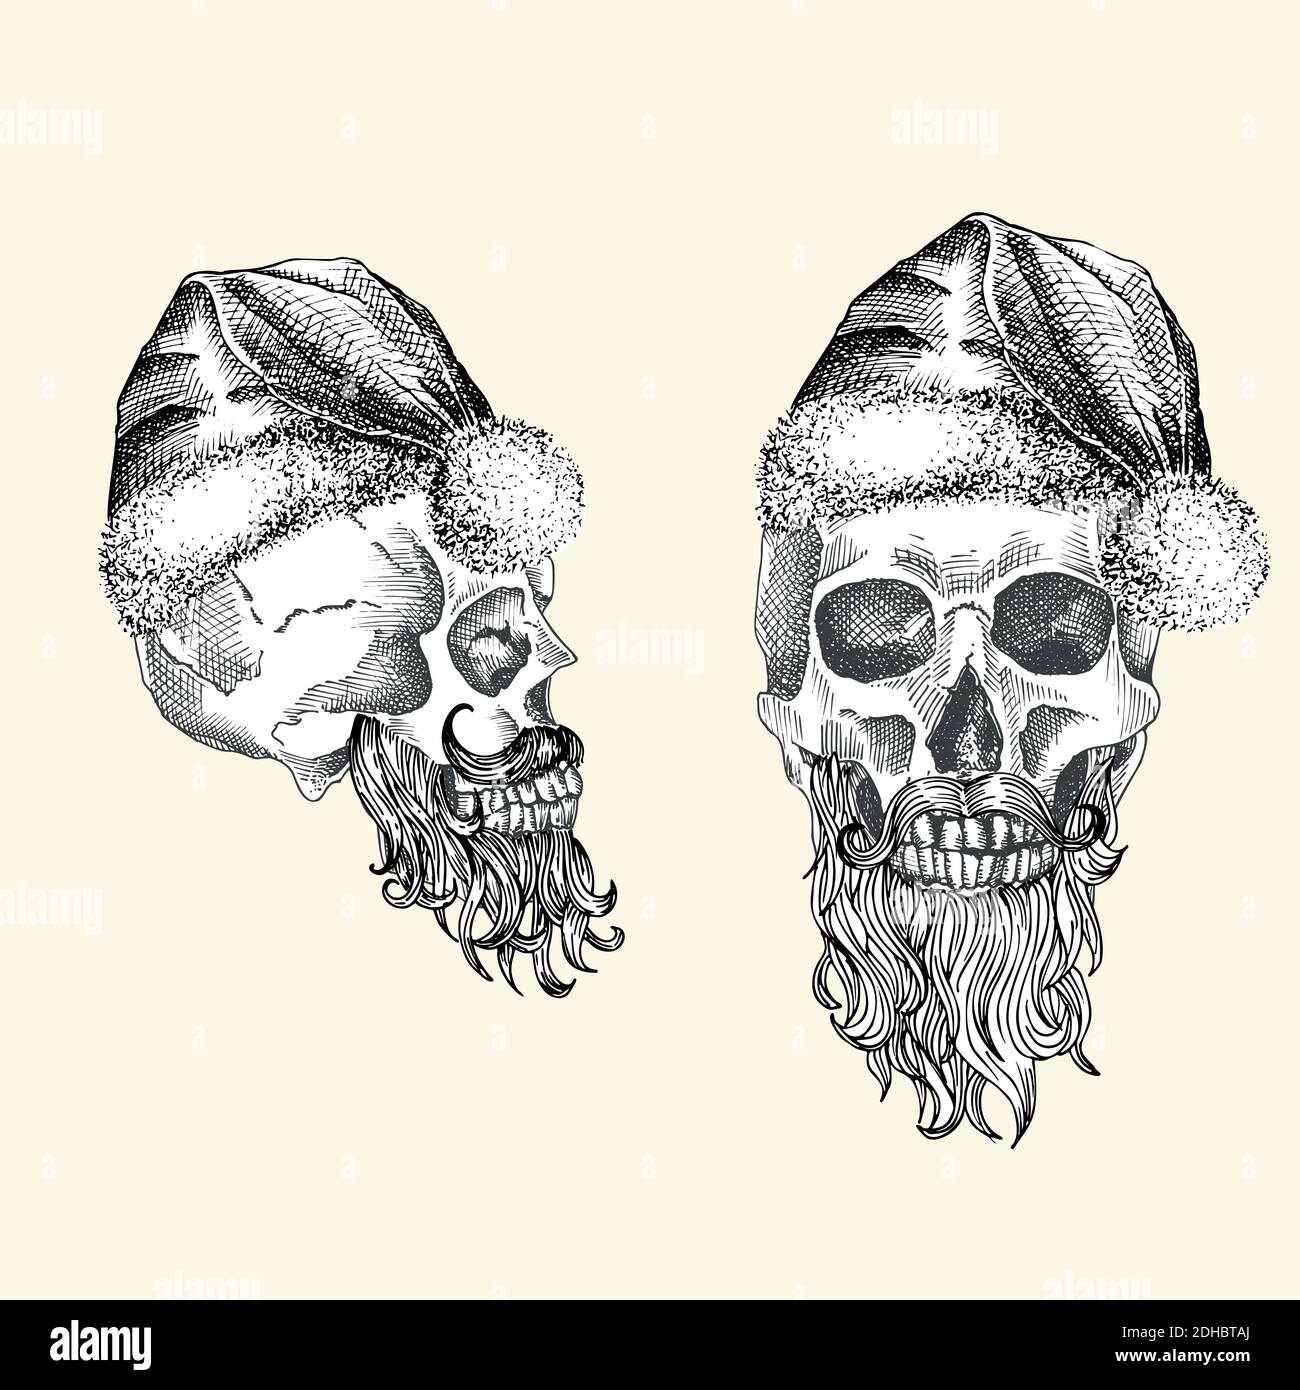 Set Hand drawn sketch human skull with santa hat and fur scarf. Black graphic art isolated on white background. Full face view of head. Engraving art Stock Vector